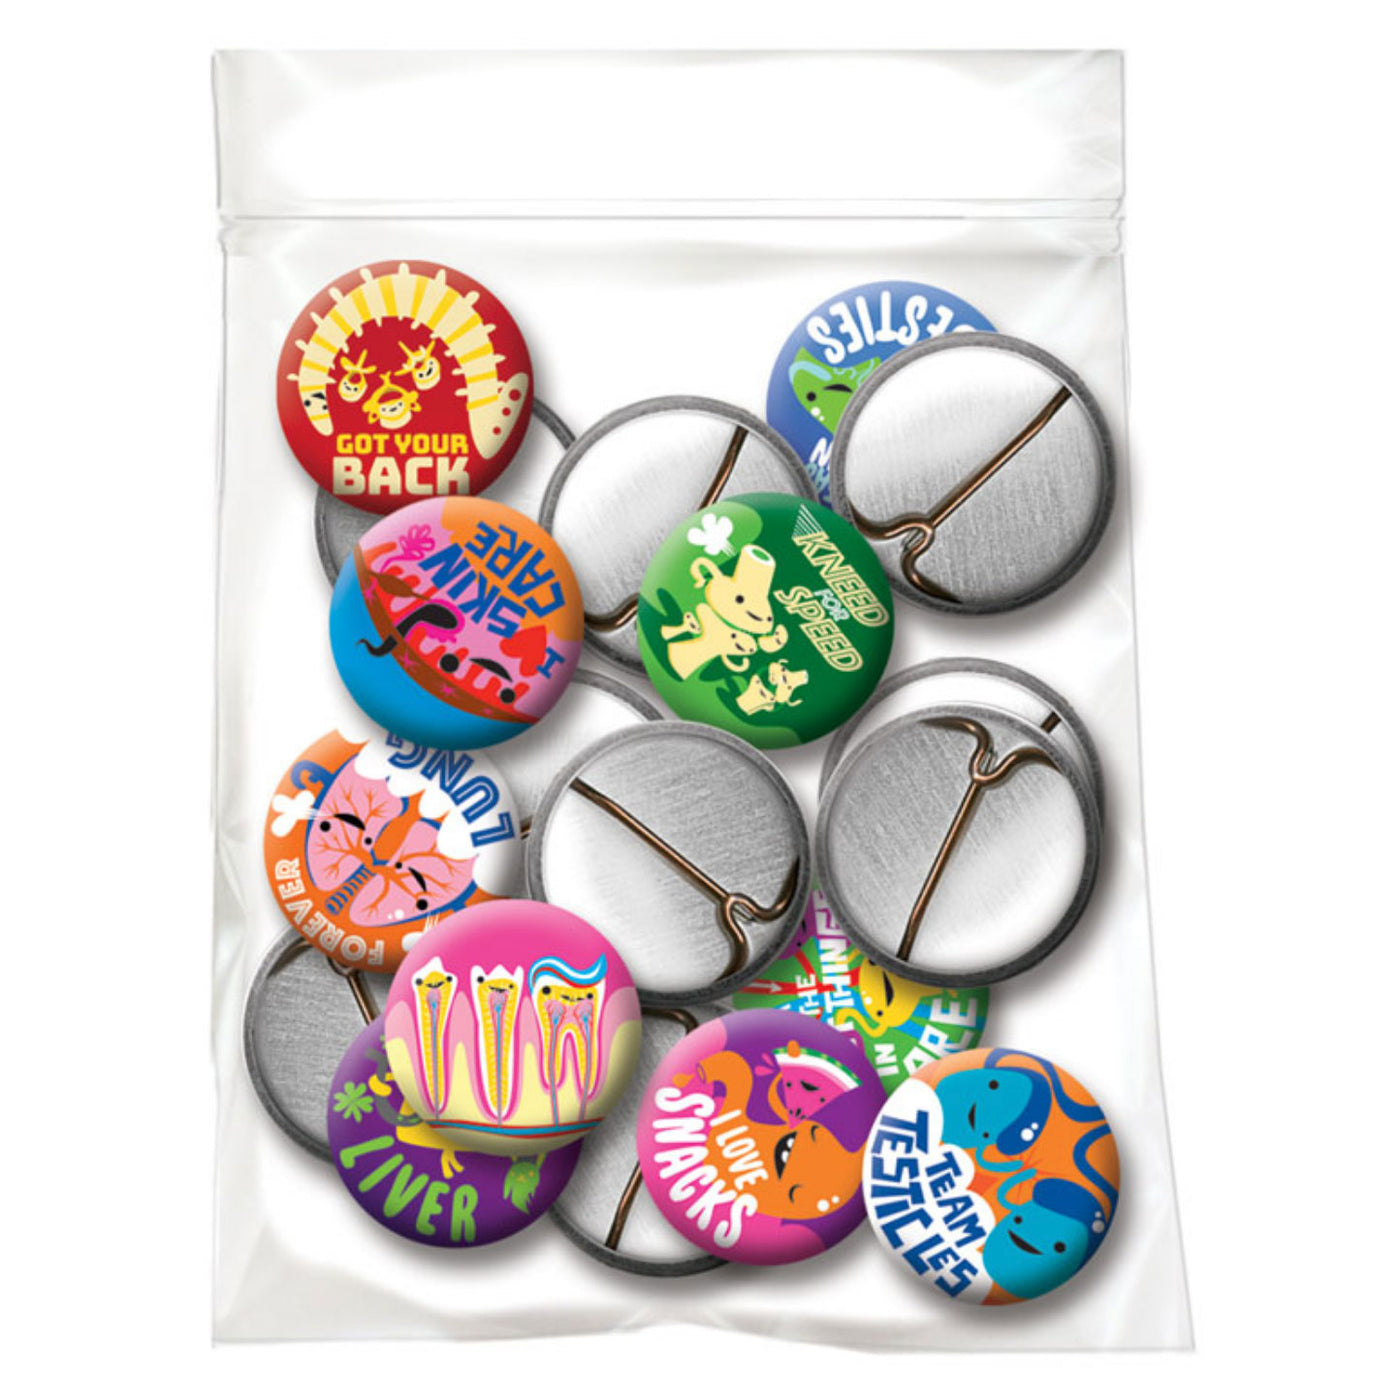 Cute Organs & Health Care Funny Button Set of 20 Badges - I Heart Guts